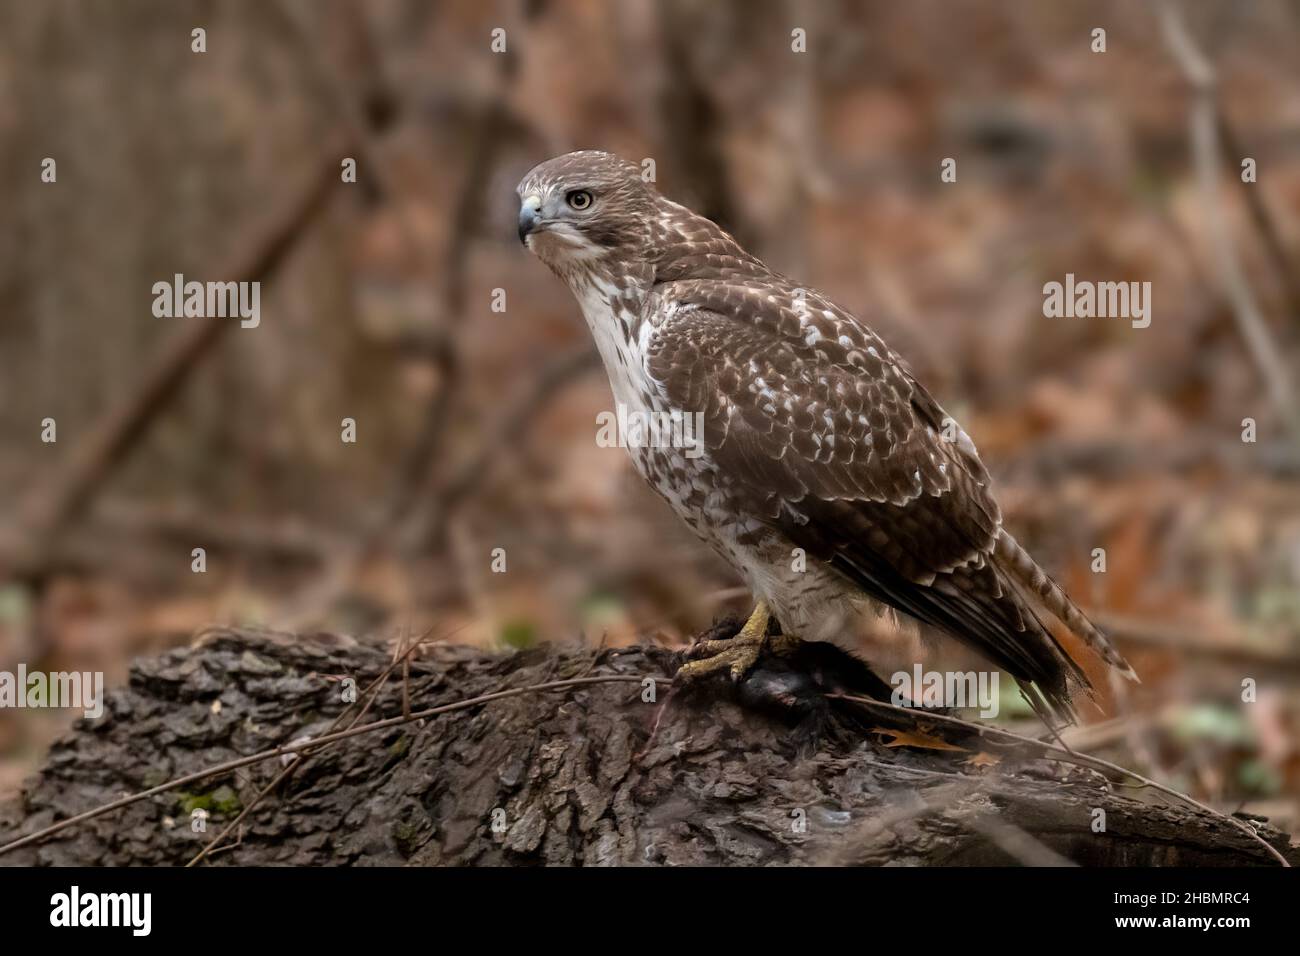 A Red-shouldered Hawk (Buteo lineatus) perched on a downed tree in a forest standing over its prey, a dead squirrel. Stock Photo